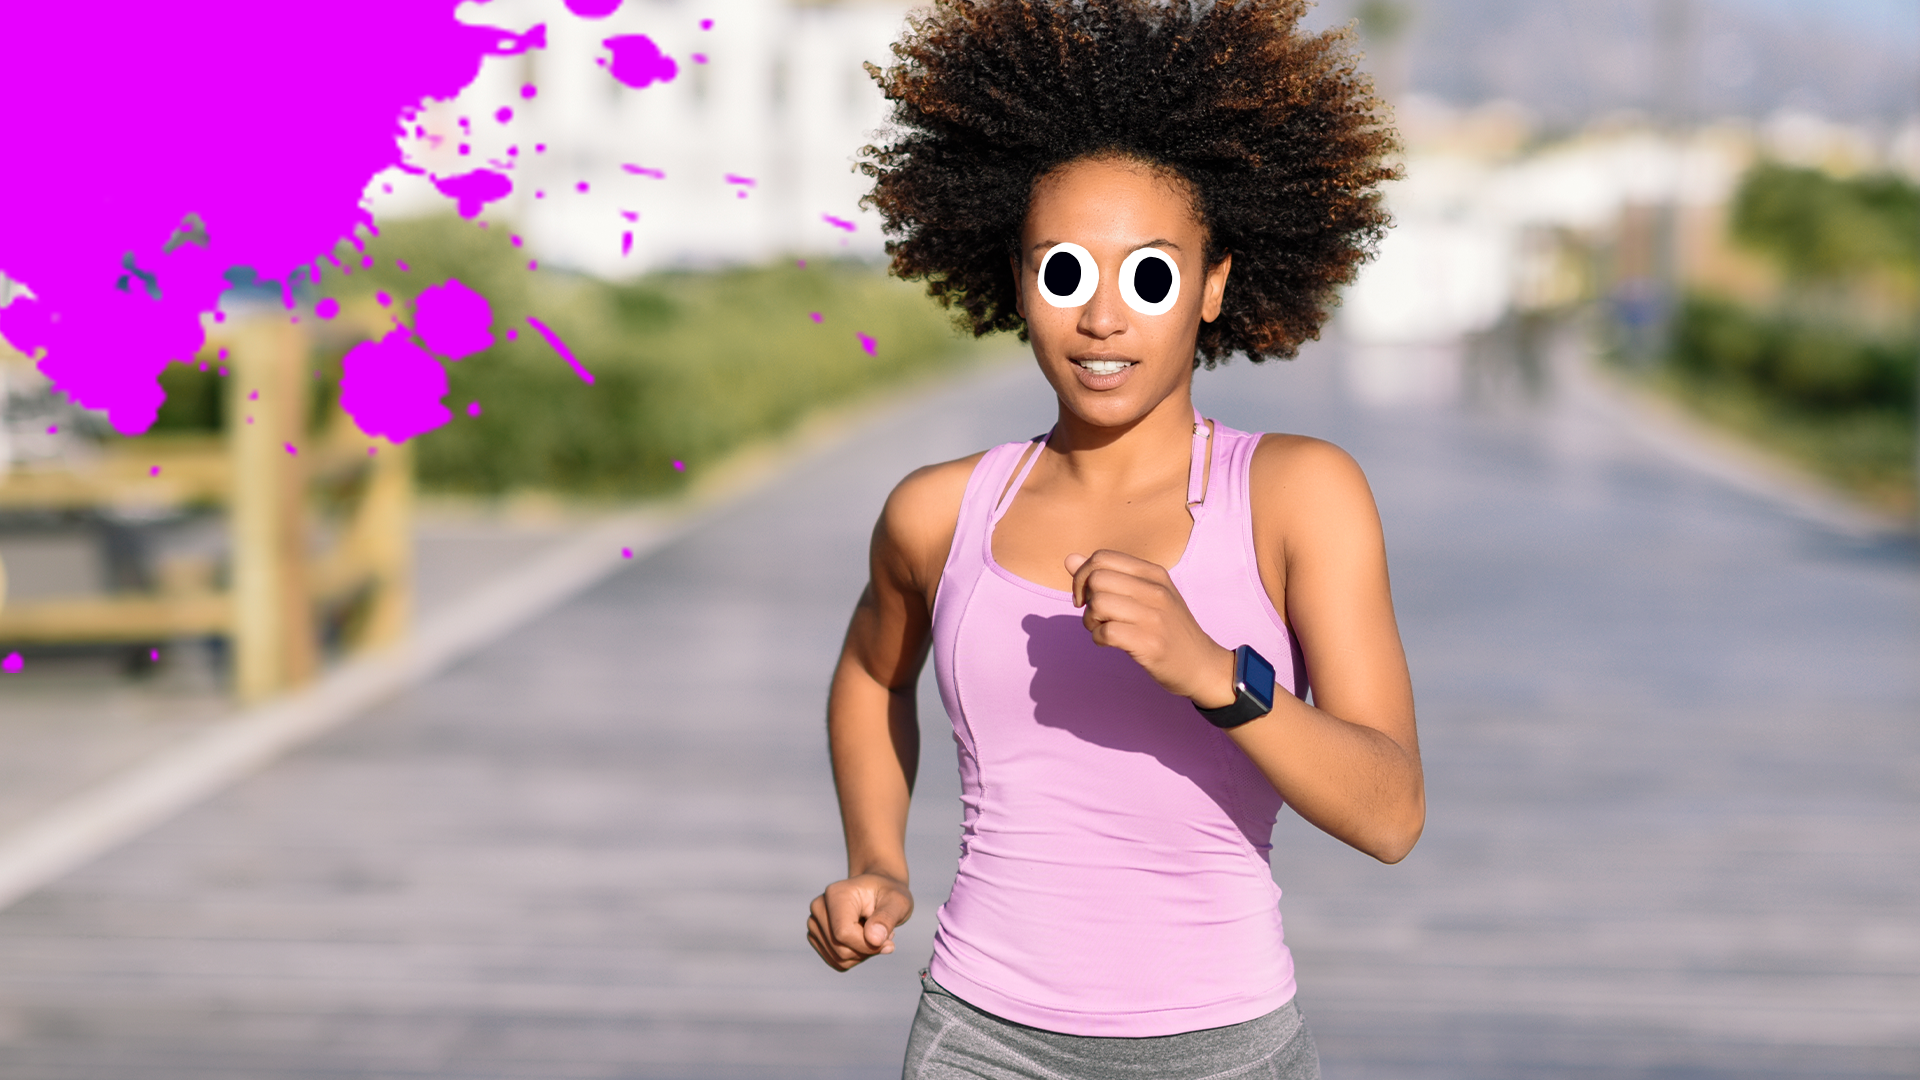 Running woman with splats